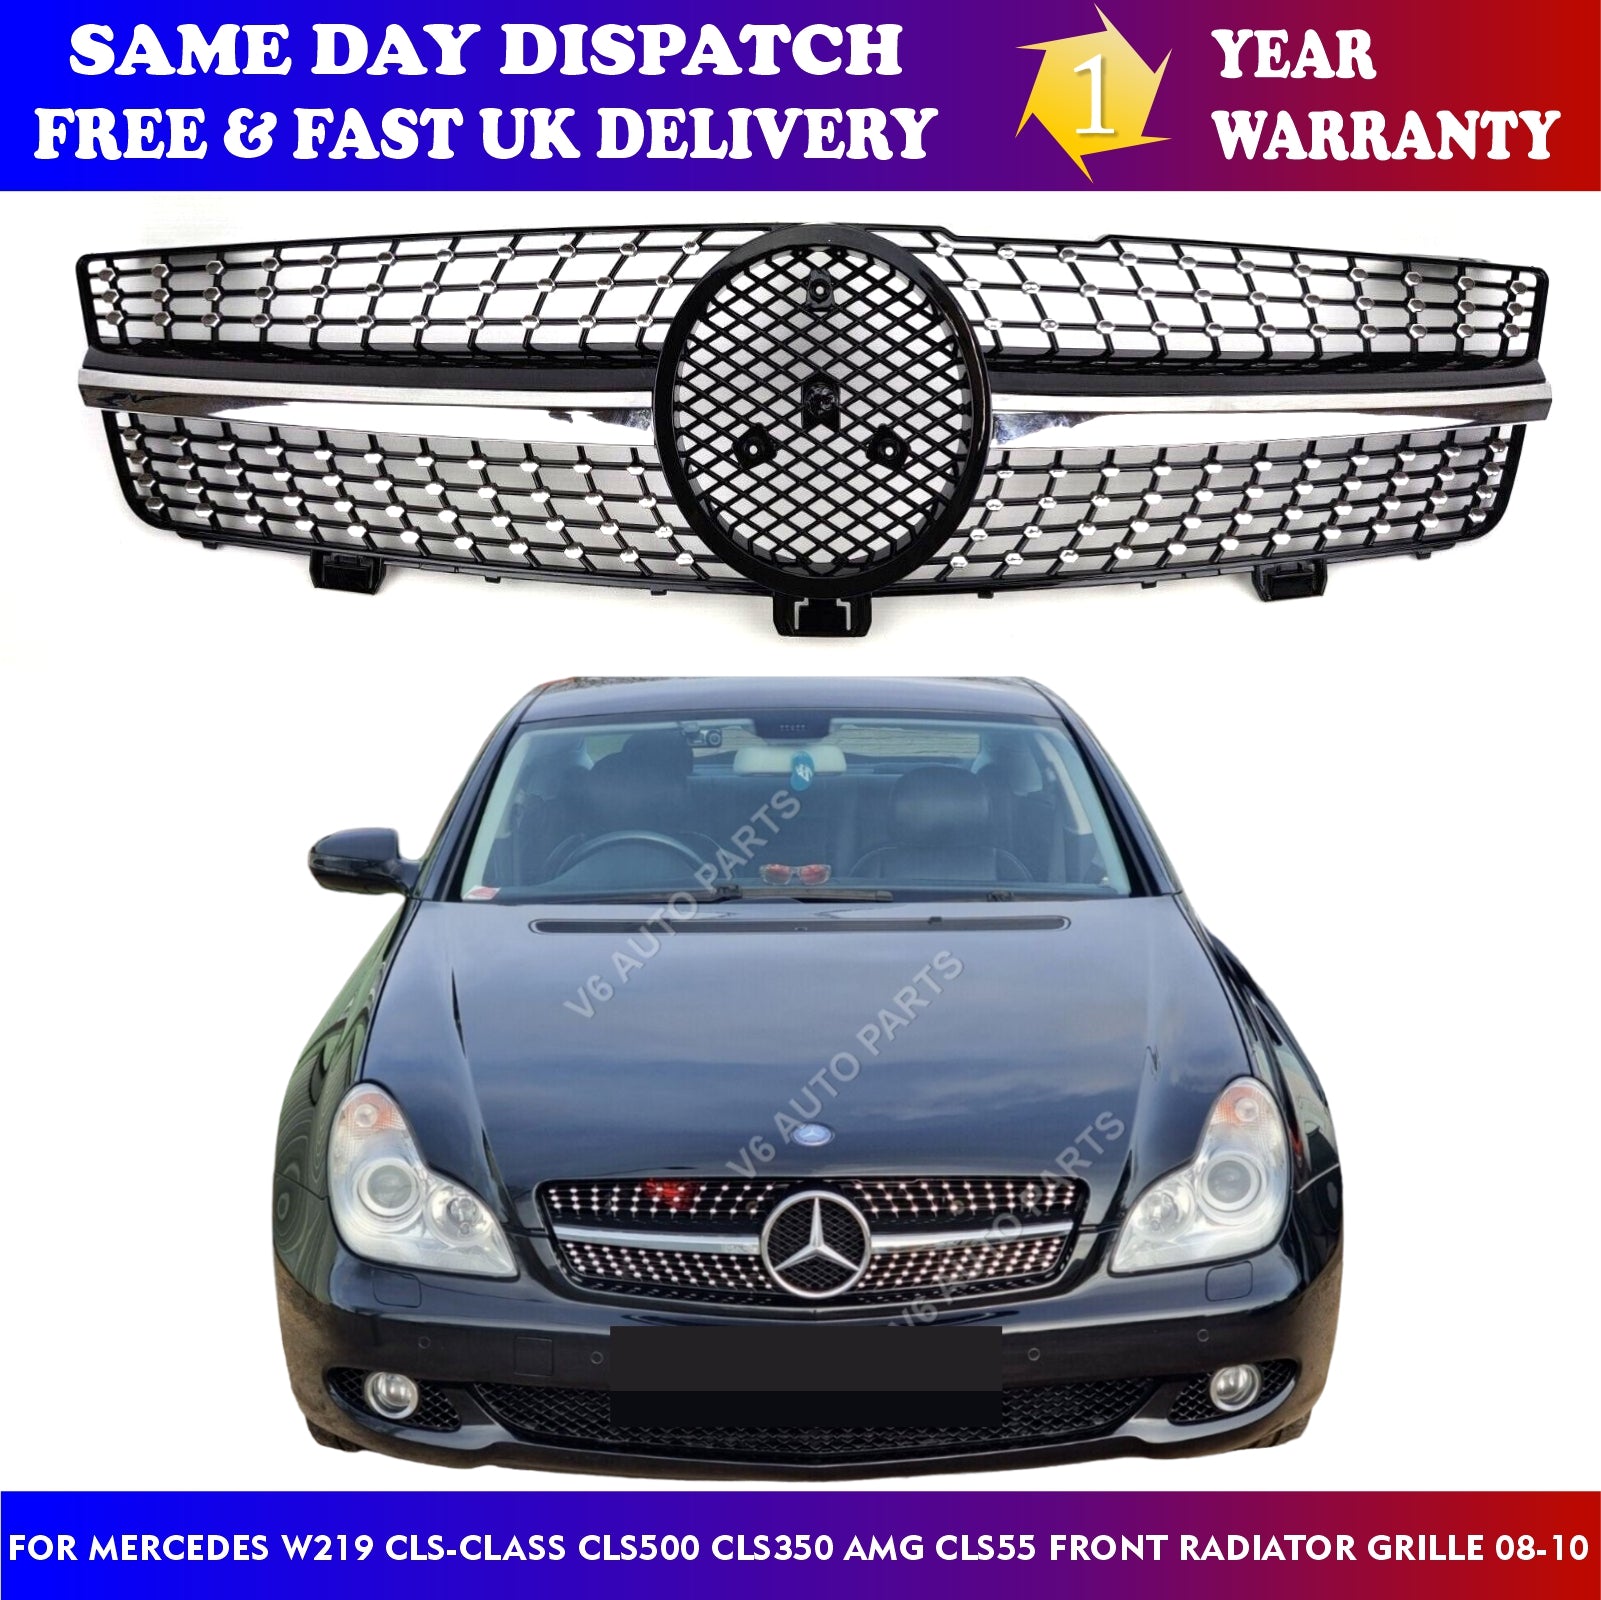 For Mercedes CLS-Class W219 CLS500 CLS400 Front Radiator Diamond Grille 2008-10